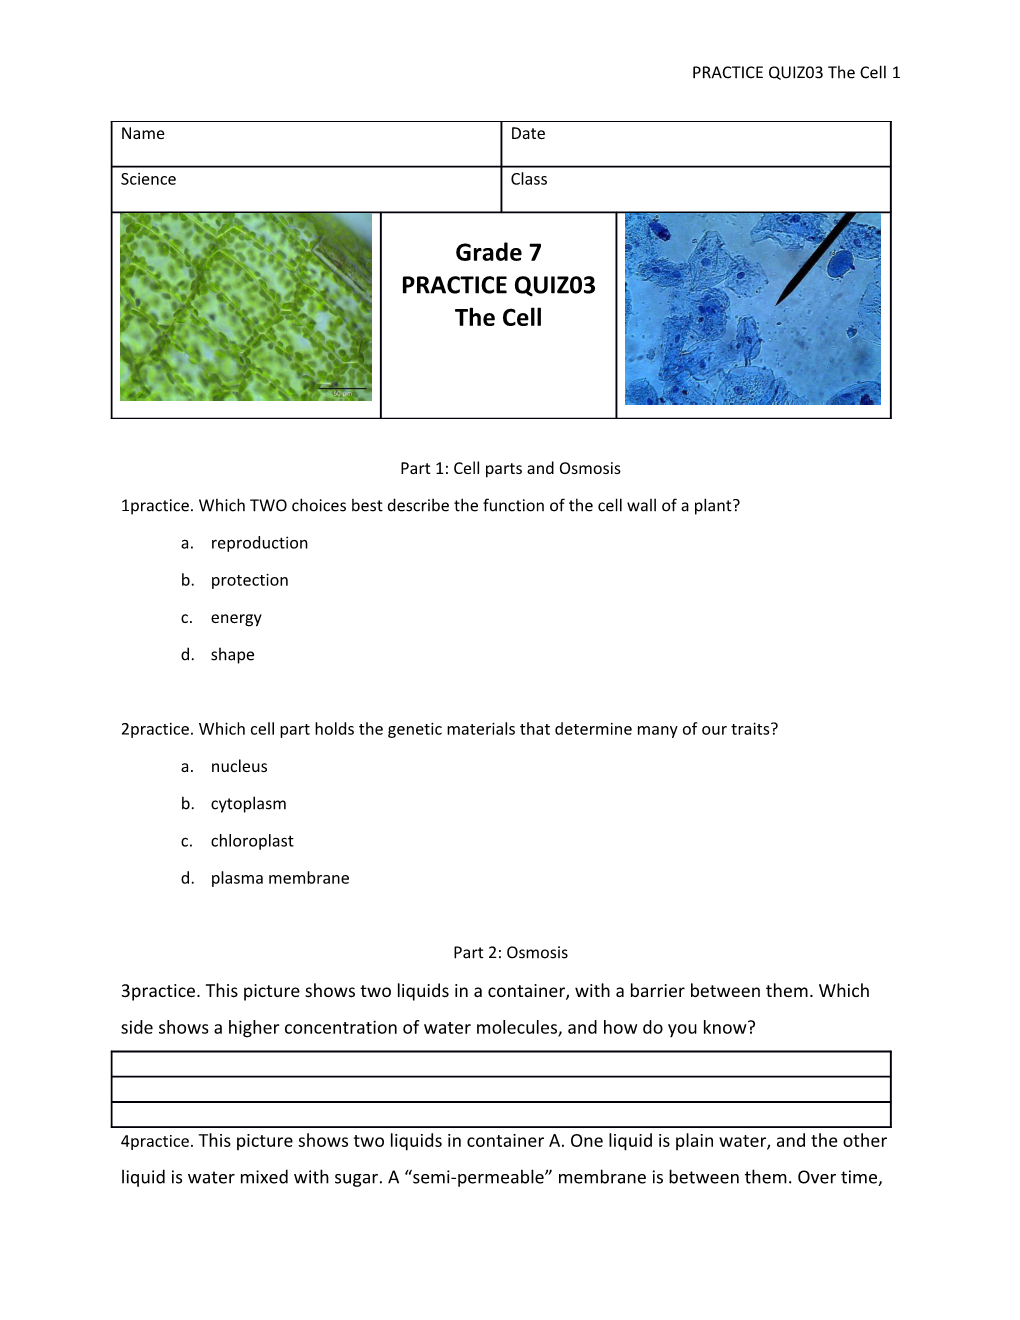 Part 1: Cell Parts and Osmosis